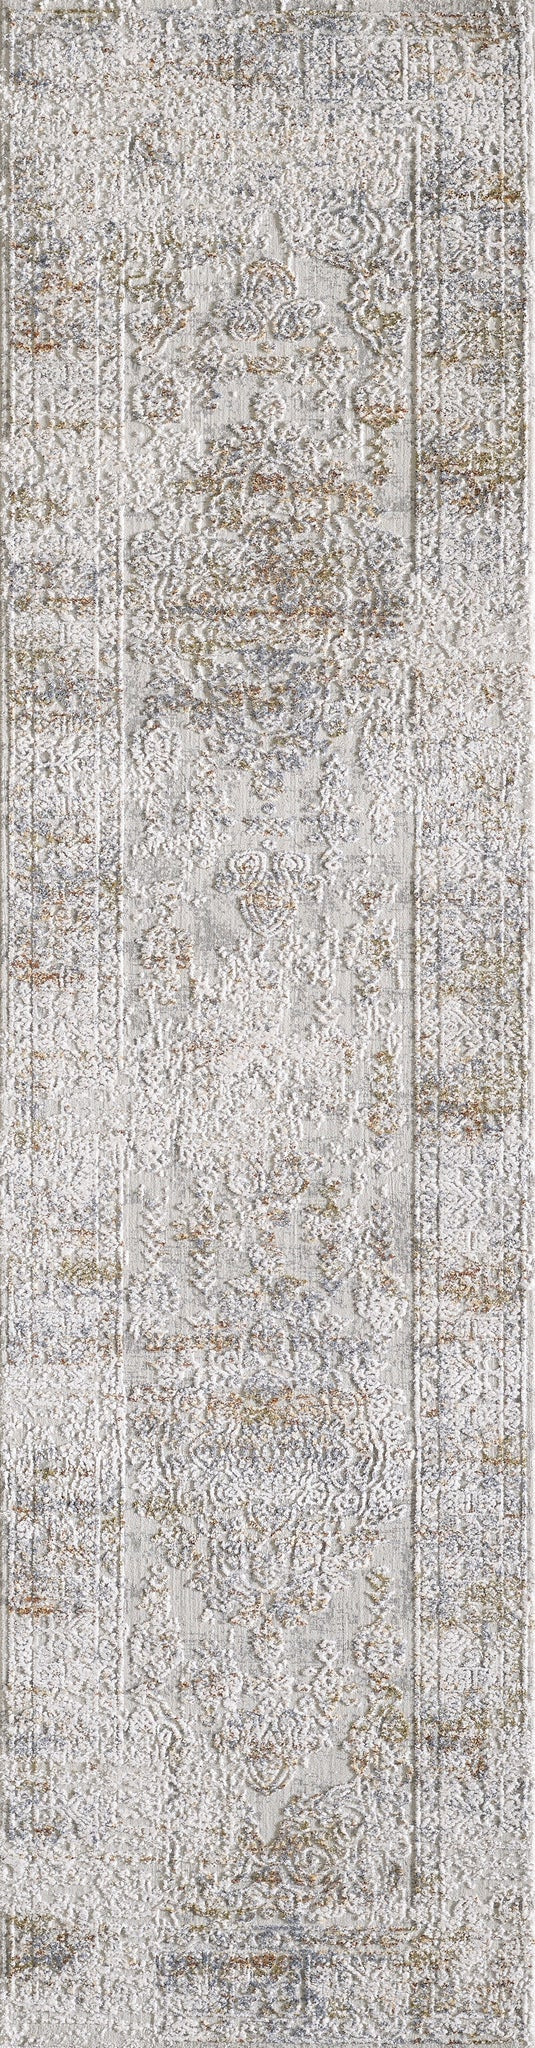 KAS Generations 7043 Grey/Gold Stella Area Rug Lifestyle Image Feature